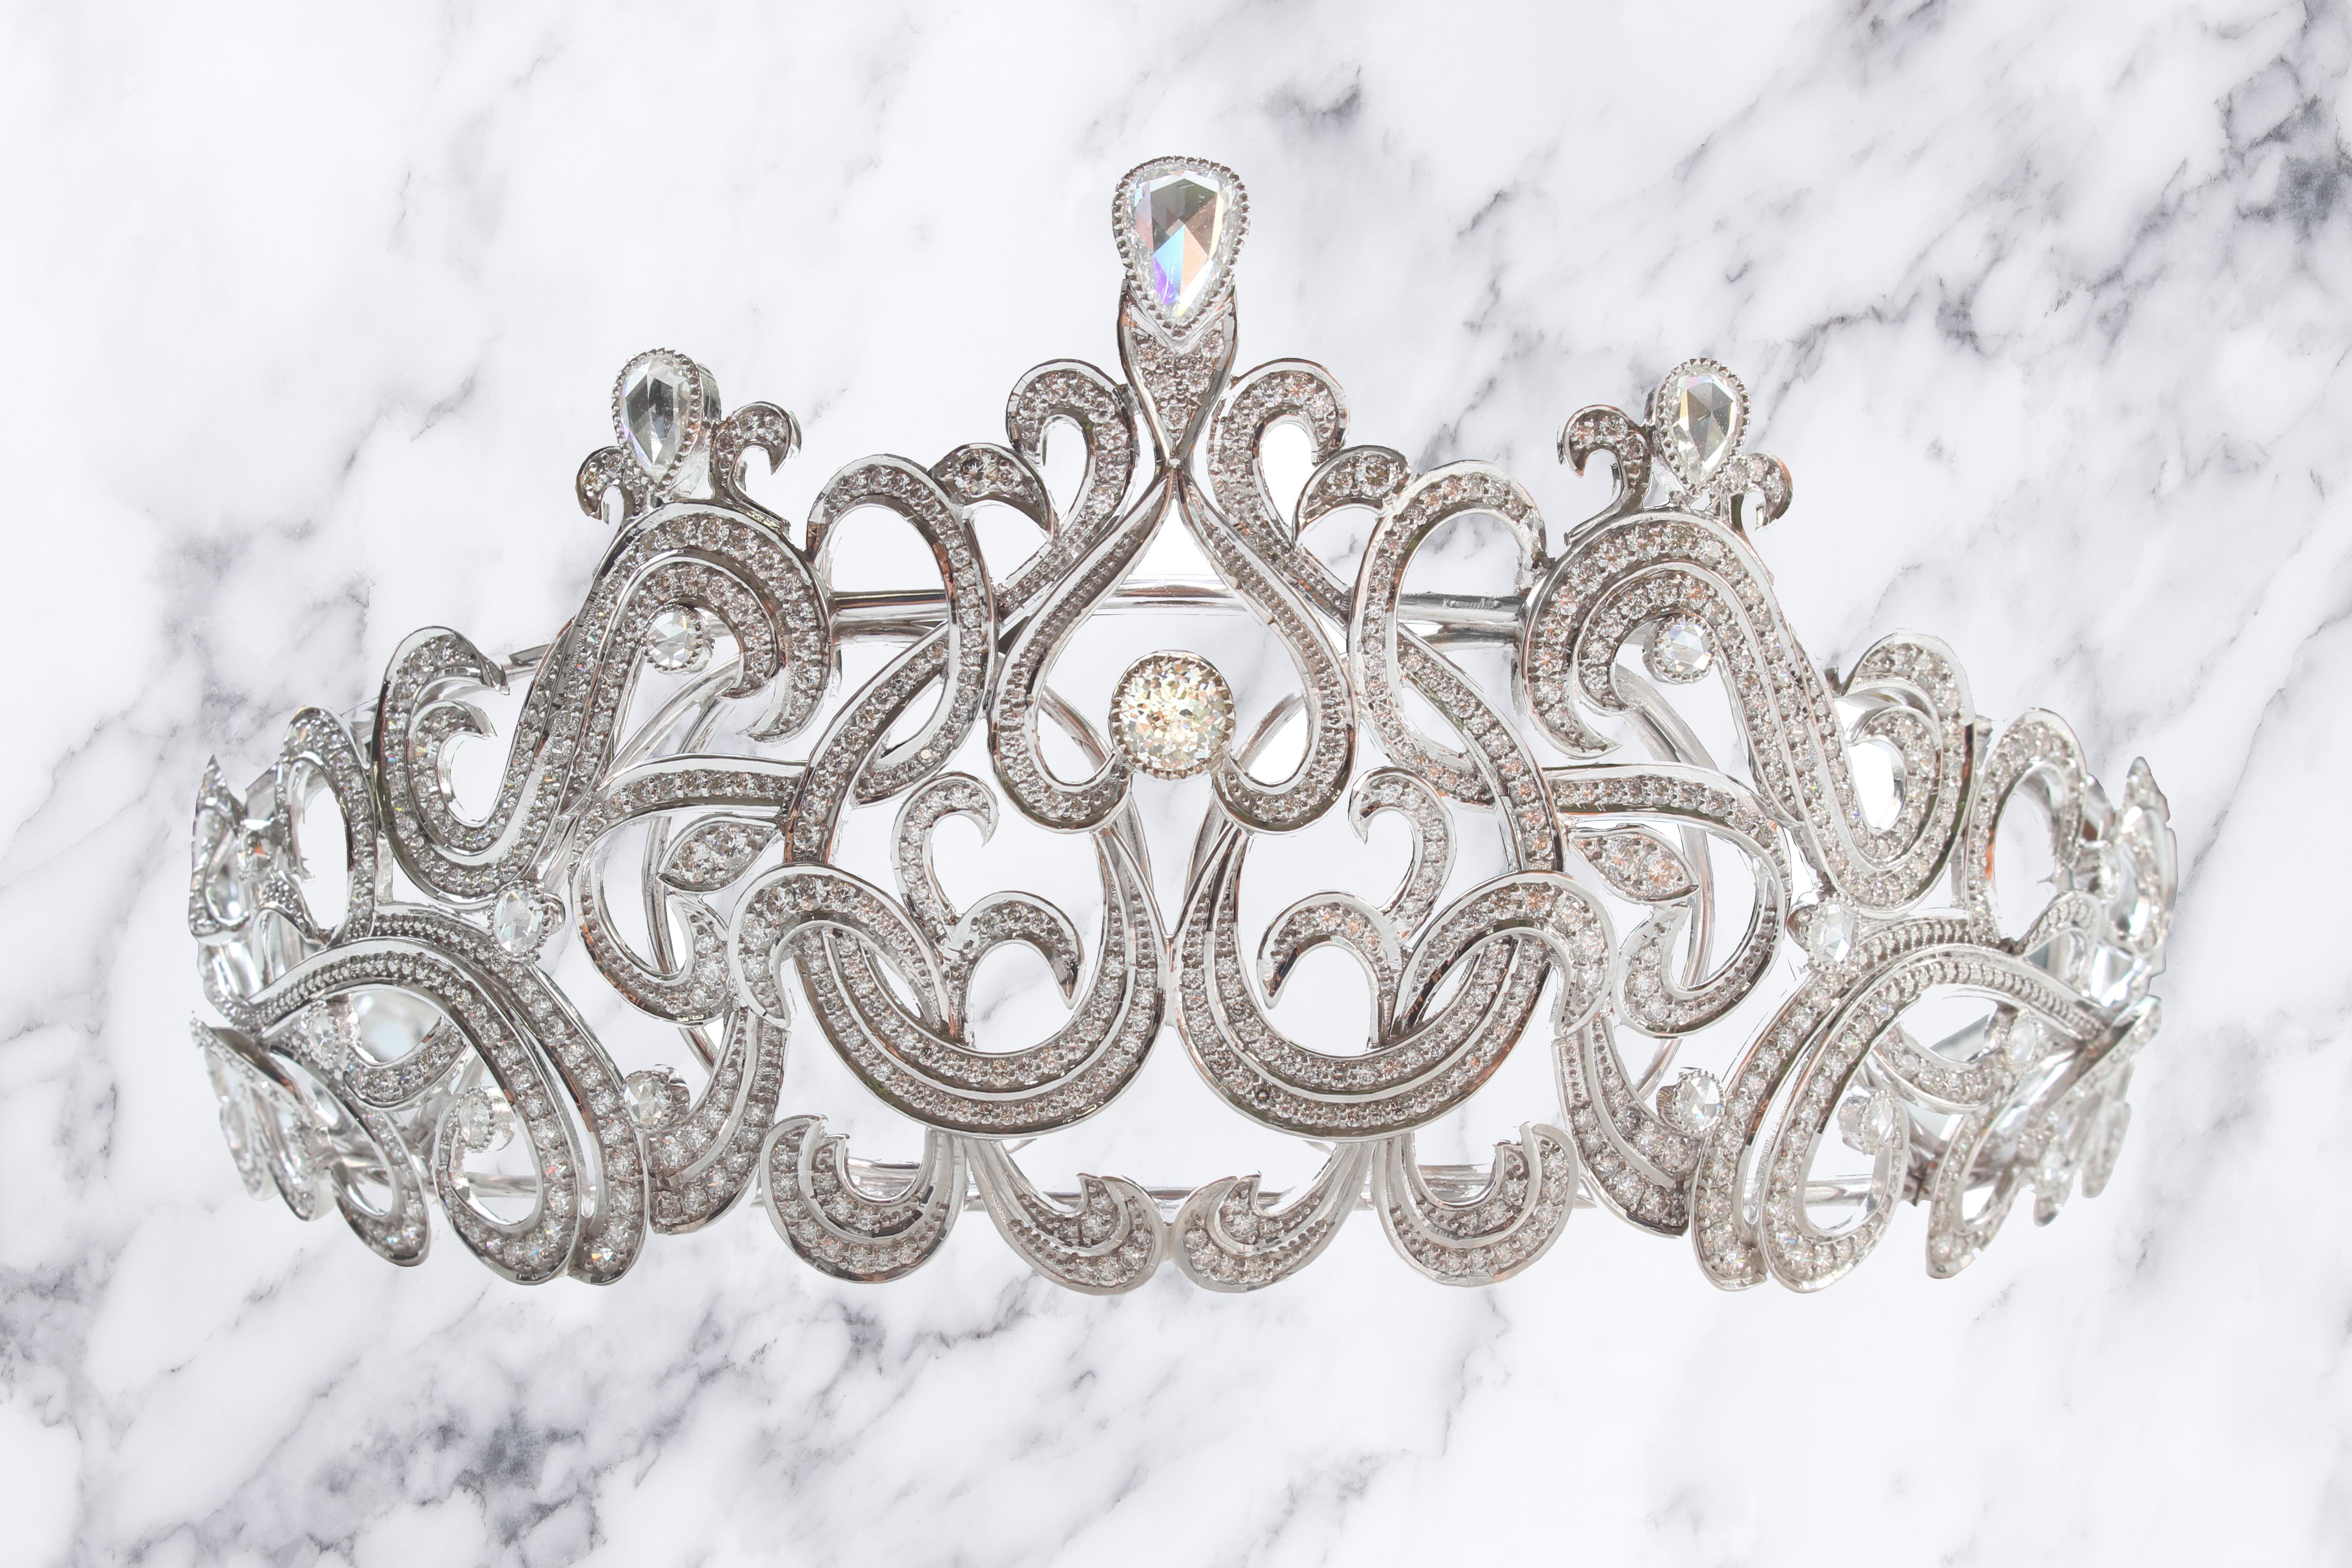 Crown Jubilee® Diamond has crafted this diamond encrusted Tiara for the socialite and collector. The total diamond weight of this Tiara is 16.67ct. The center diamond is a Round Crown Jubilee® Diamond. The Crown Jubilee® is a reclaimed diamond that